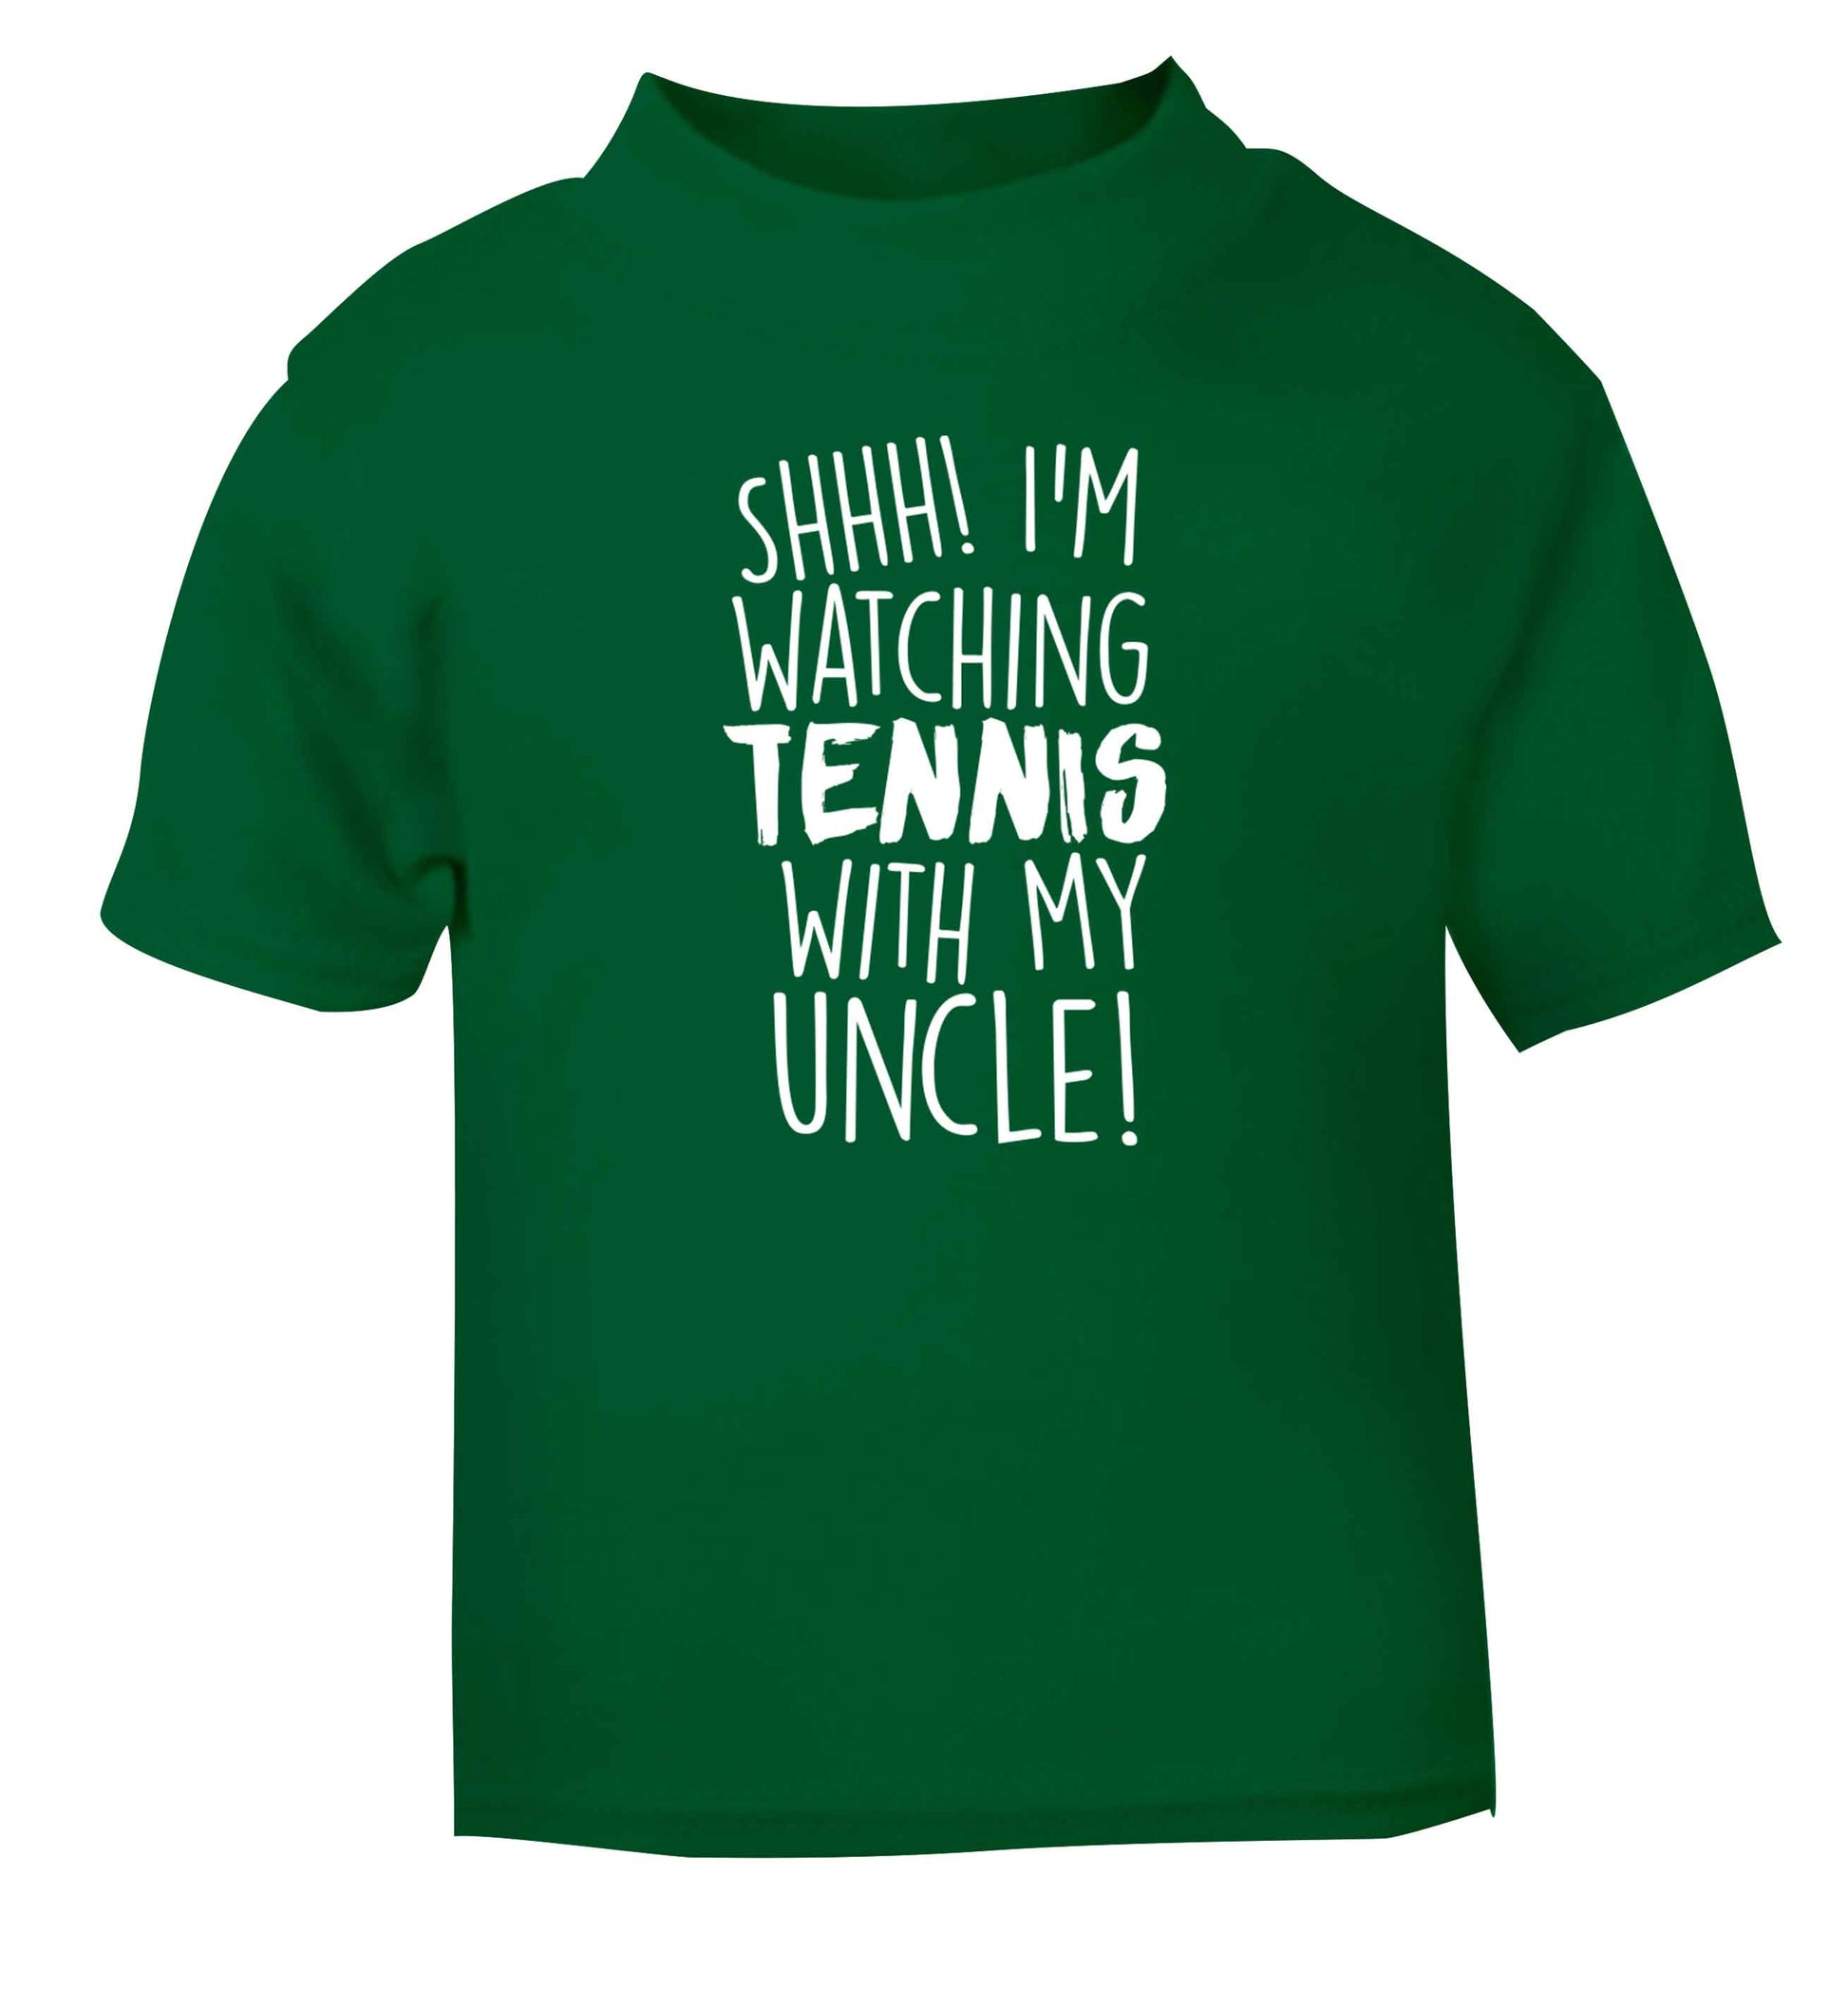 Shh! I'm watching tennis with my uncle! green Baby Toddler Tshirt 2 Years